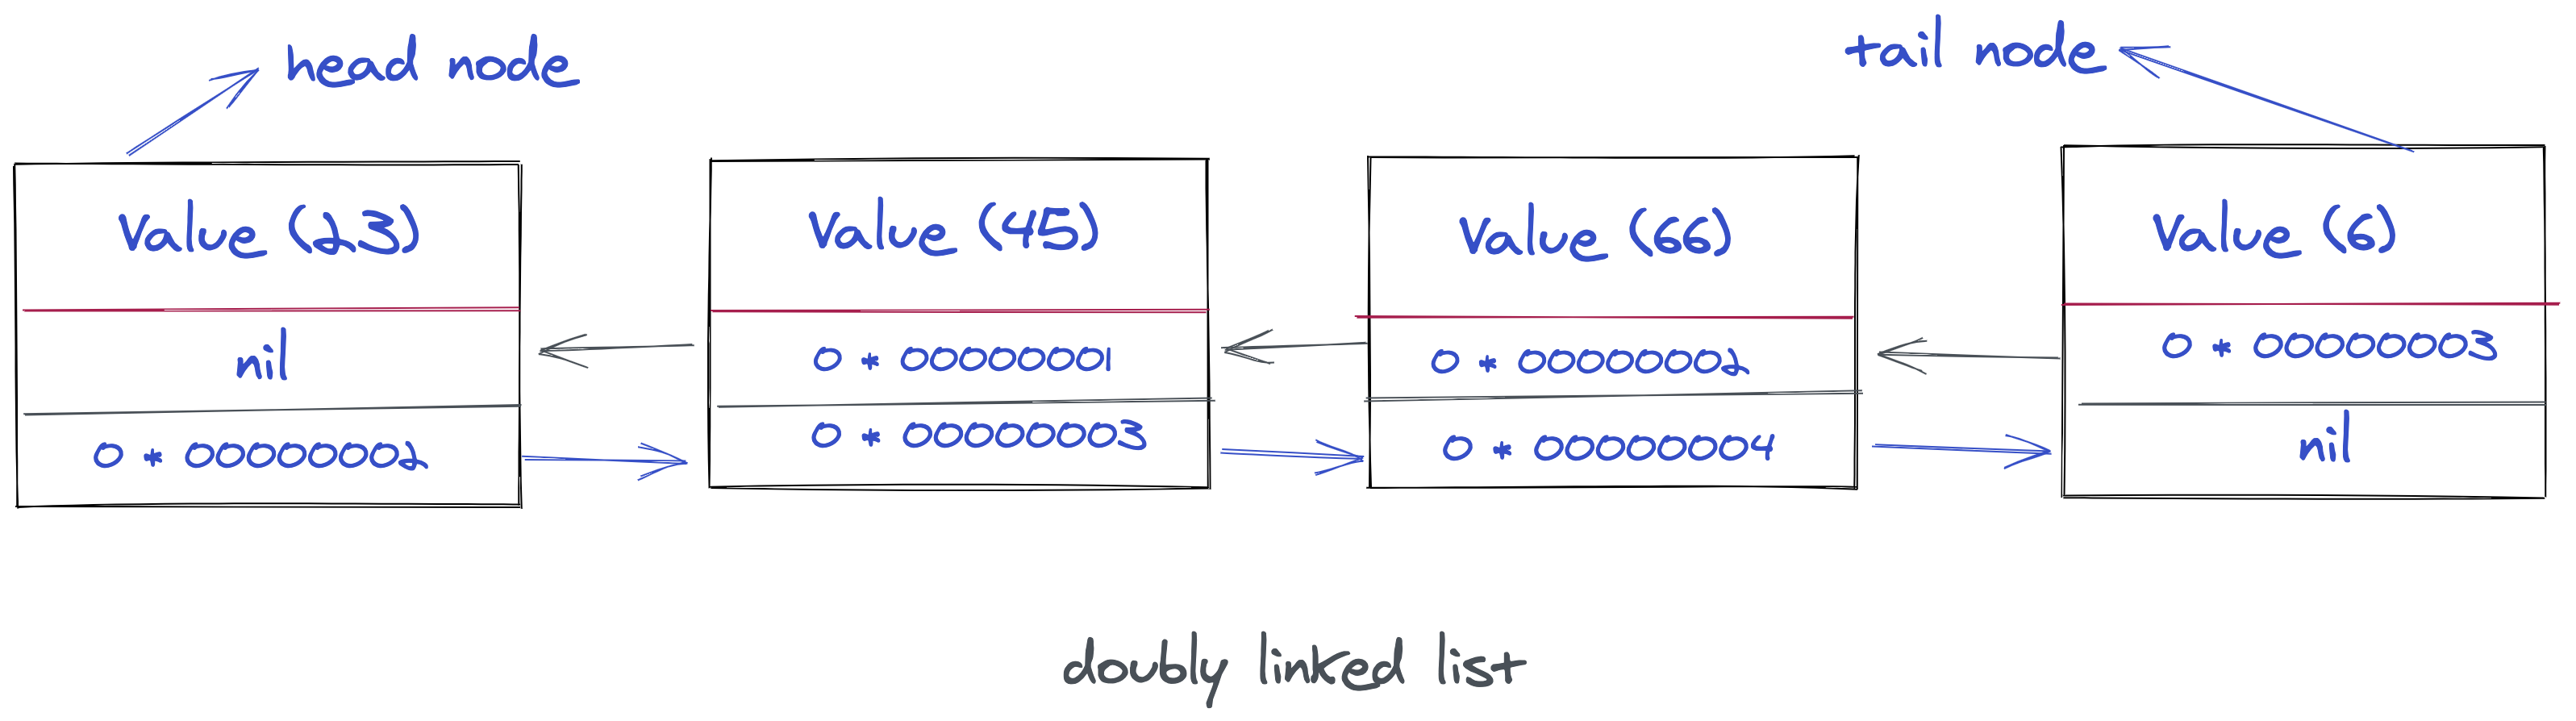 Doubly linked list example